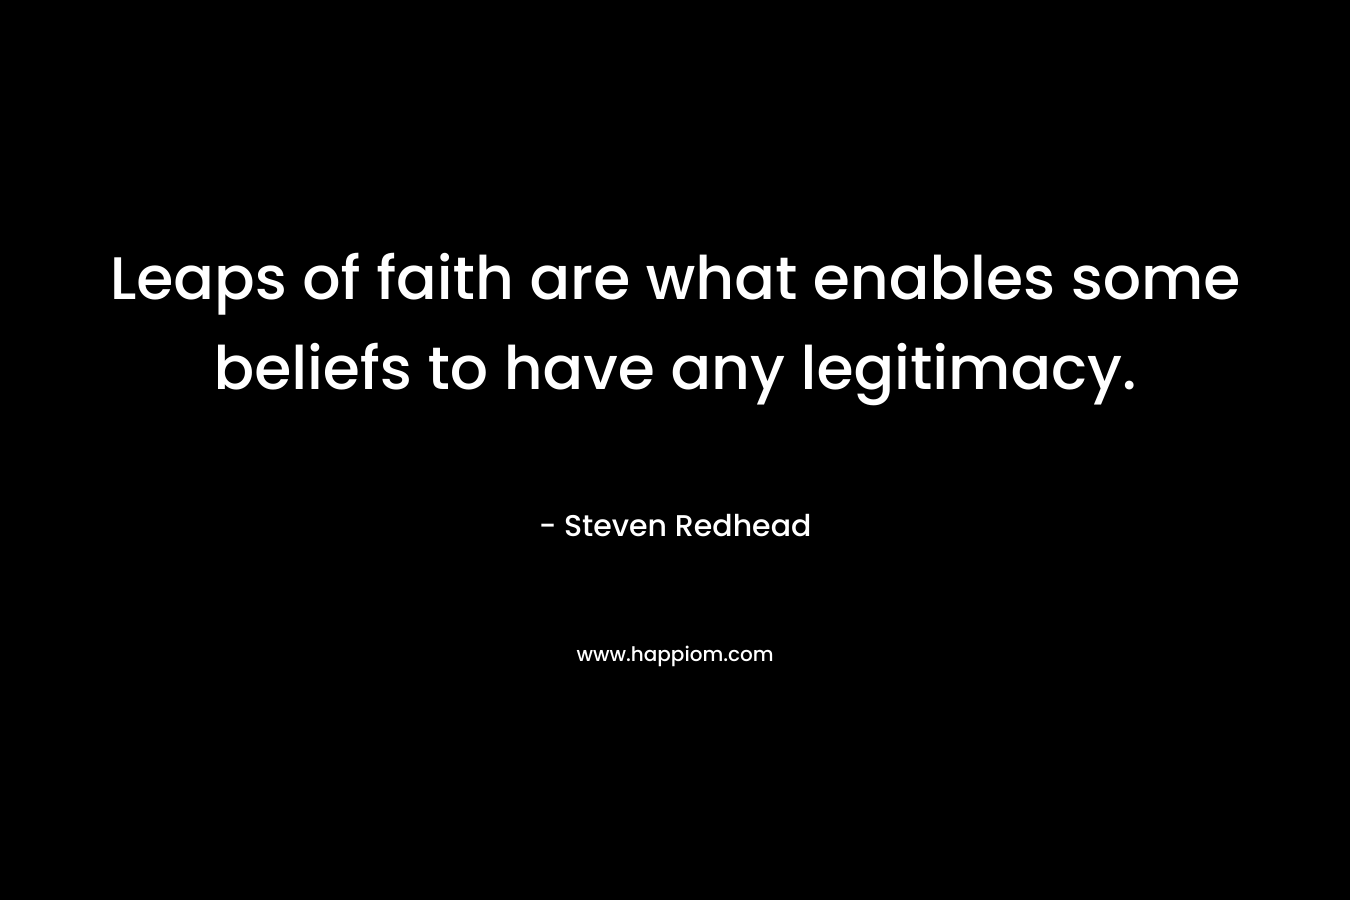 Leaps of faith are what enables some beliefs to have any legitimacy.